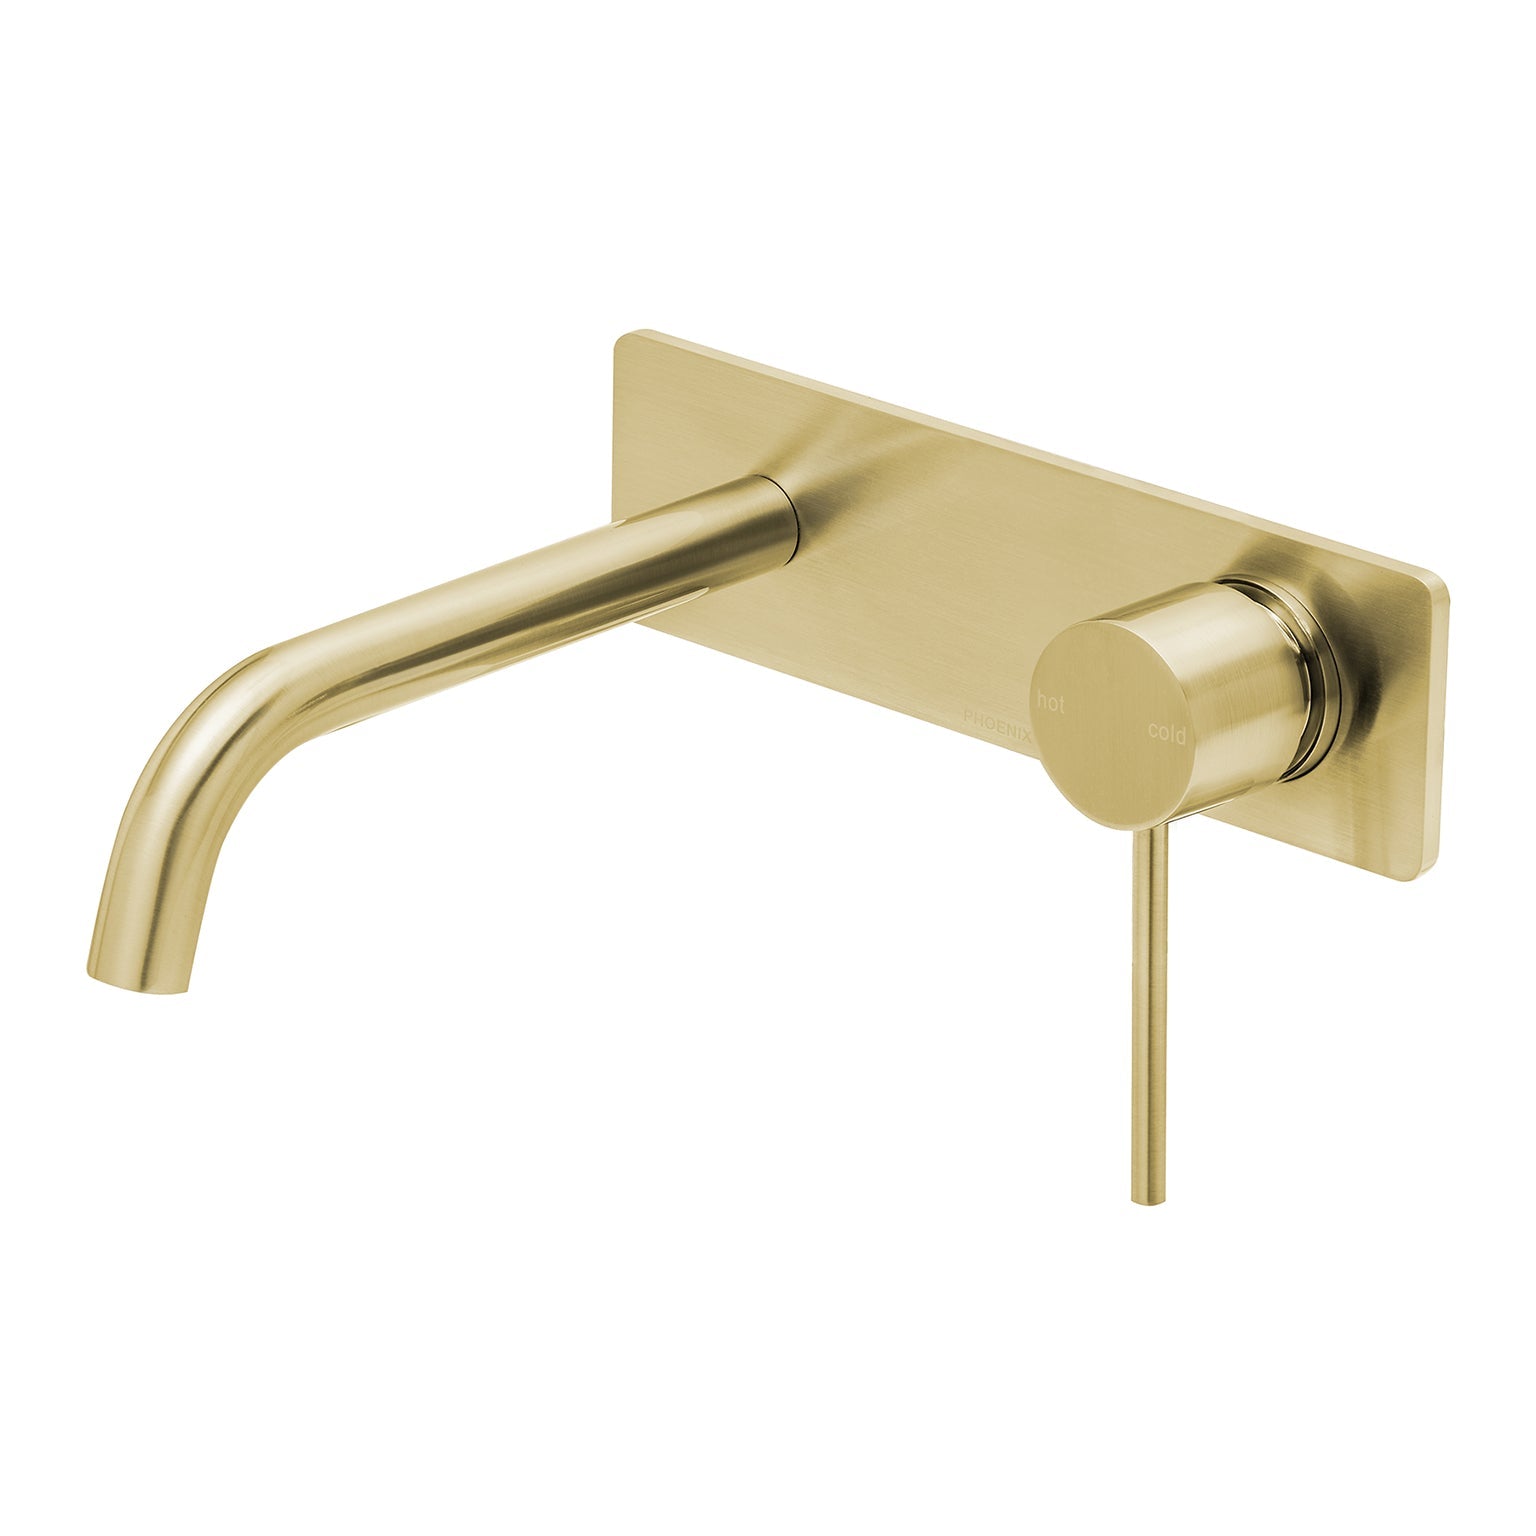 PHOENIX VIVID SLIMLINE SWITCHMIX WALL BASIN / BATH MIXER SET FIT-OFF AND ROUGH-IN KIT 180MM BRUSHED GOLD